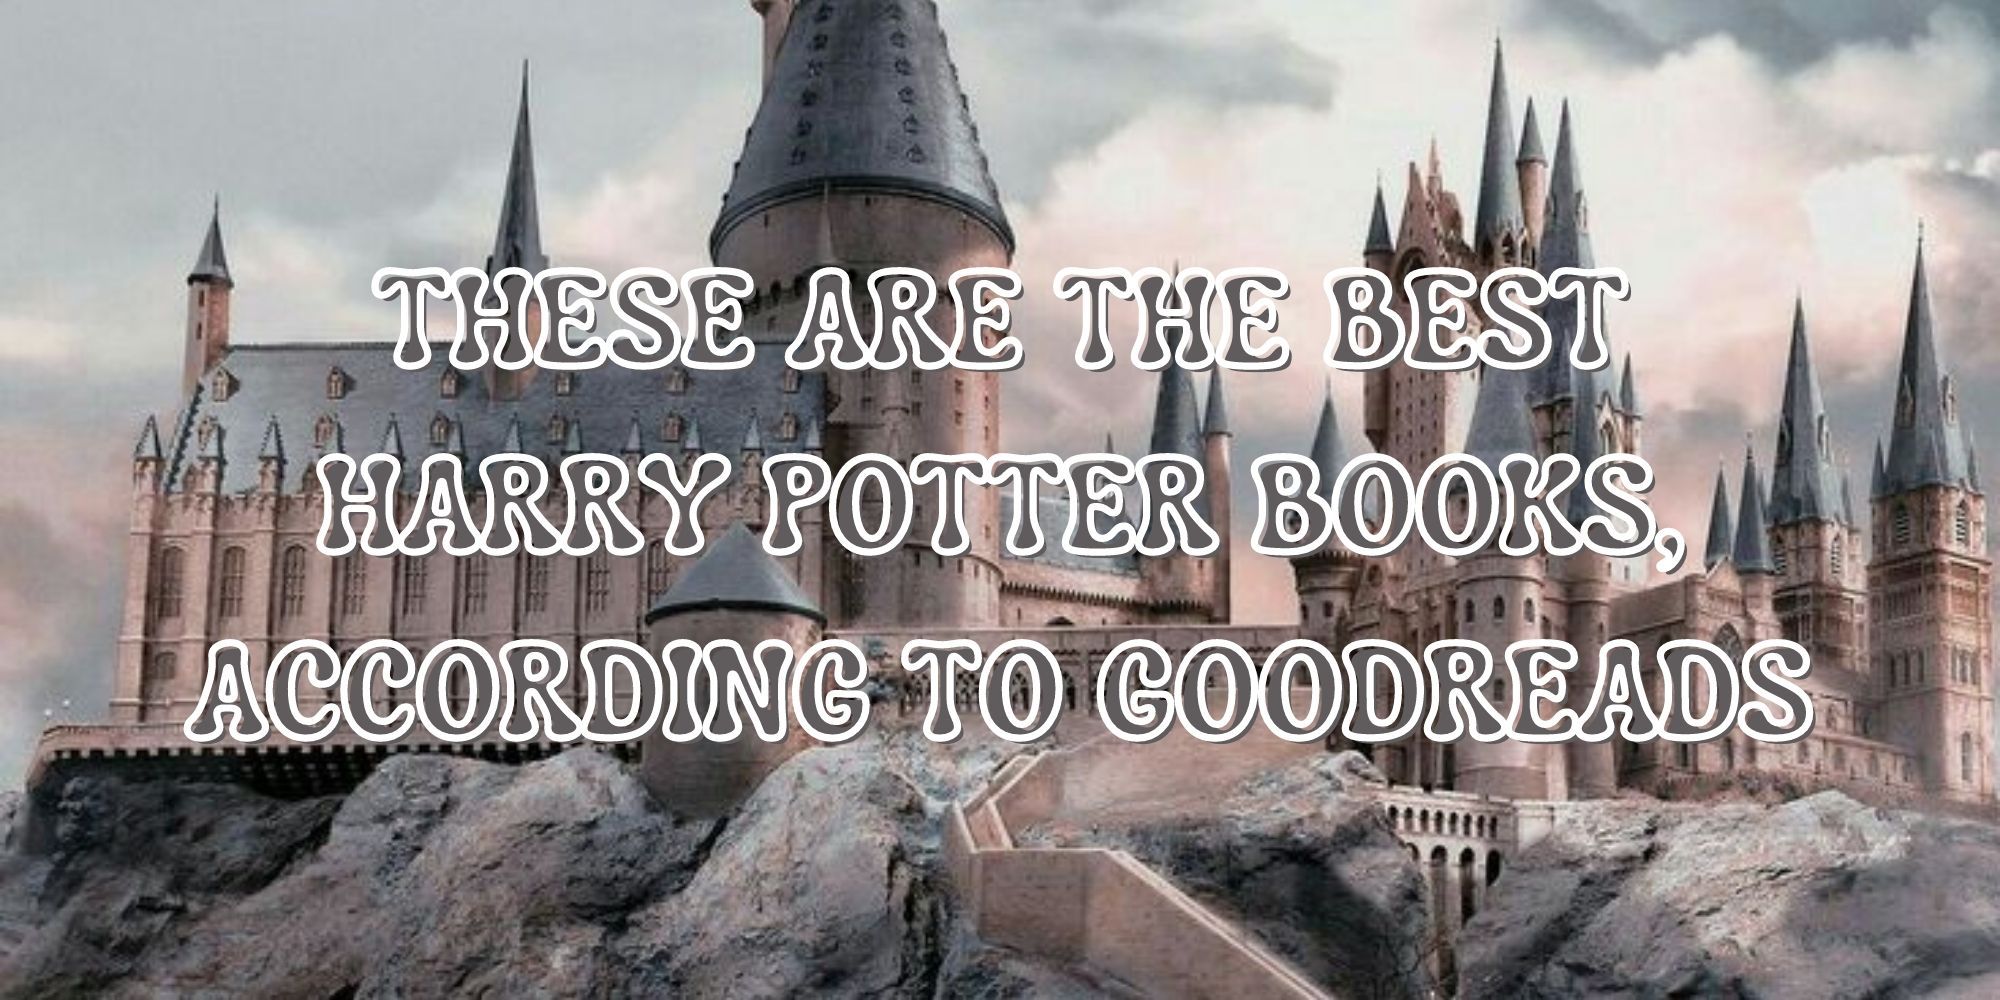 These Are The Best Harry Potter Books, According To Goodreads